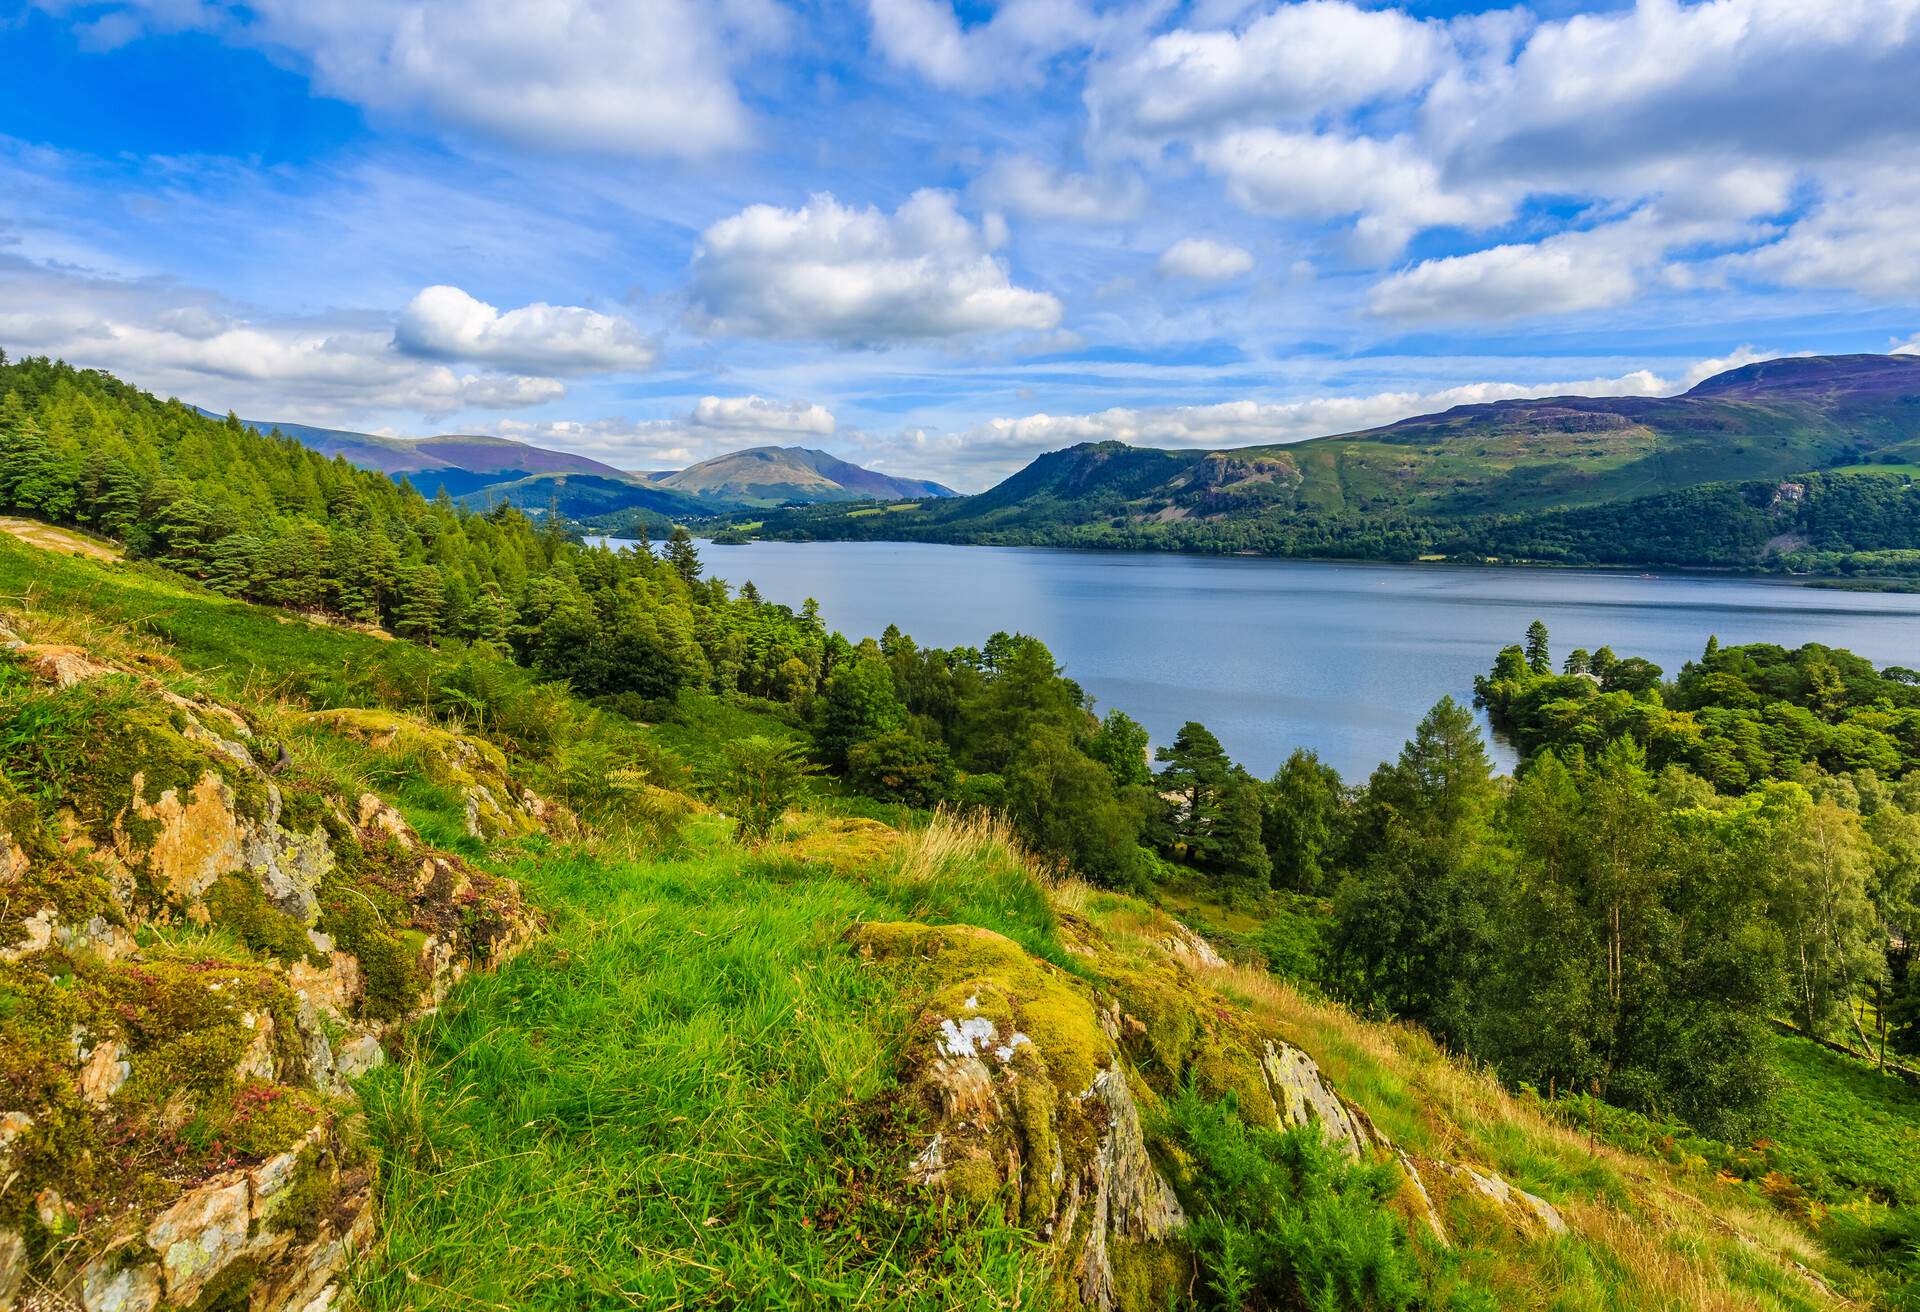 Hillside view looking over Derwentwater, The Lake District, Cumbria, England; Shutterstock ID 596427842